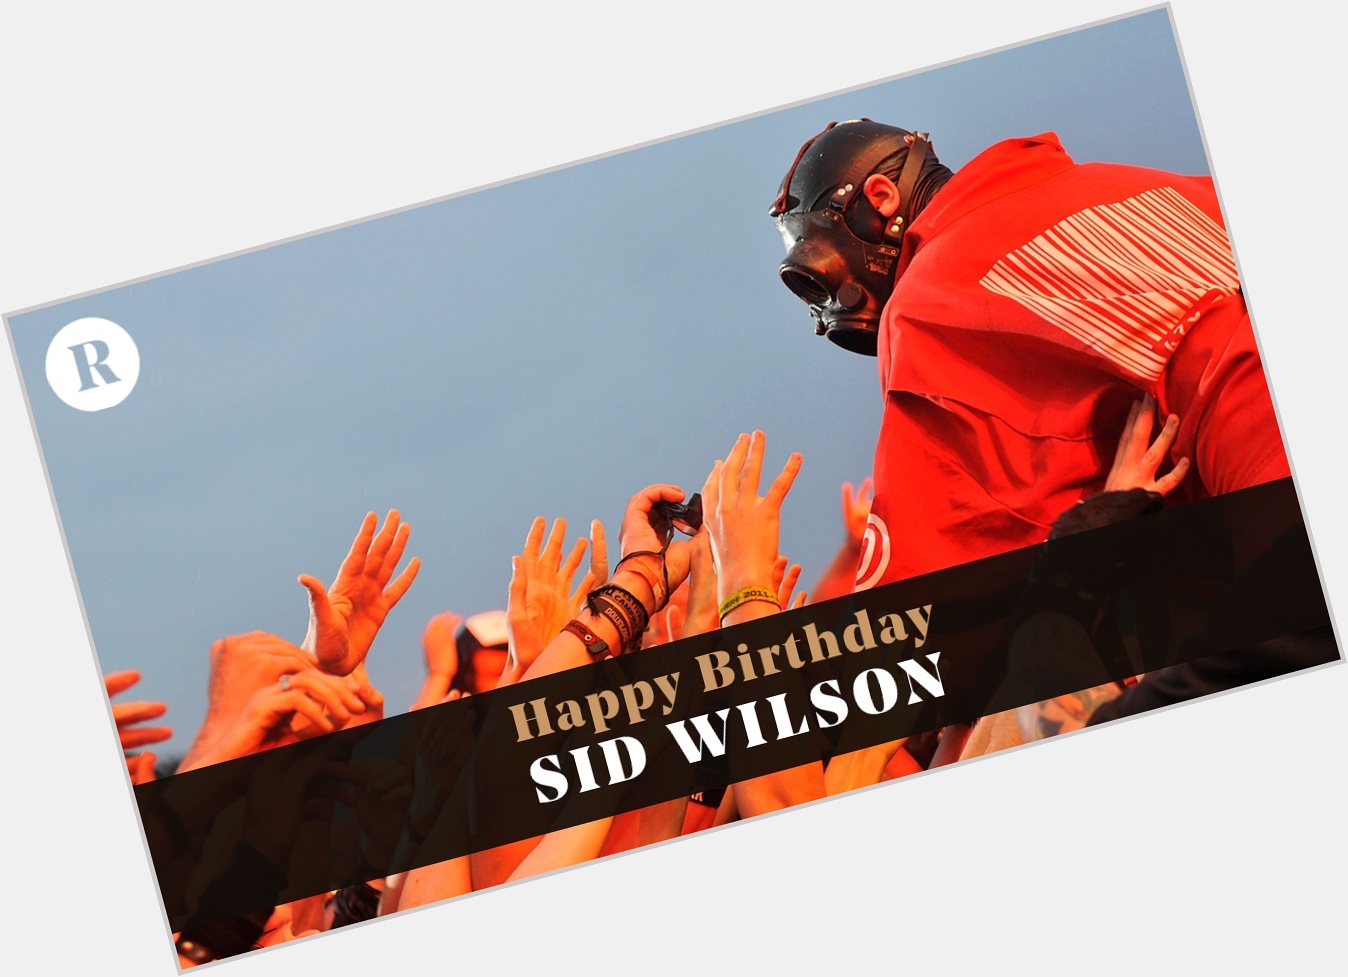    Happy birthday, Sid Wilson!  What\s the wildest thing you\ve seen him do at a show? 